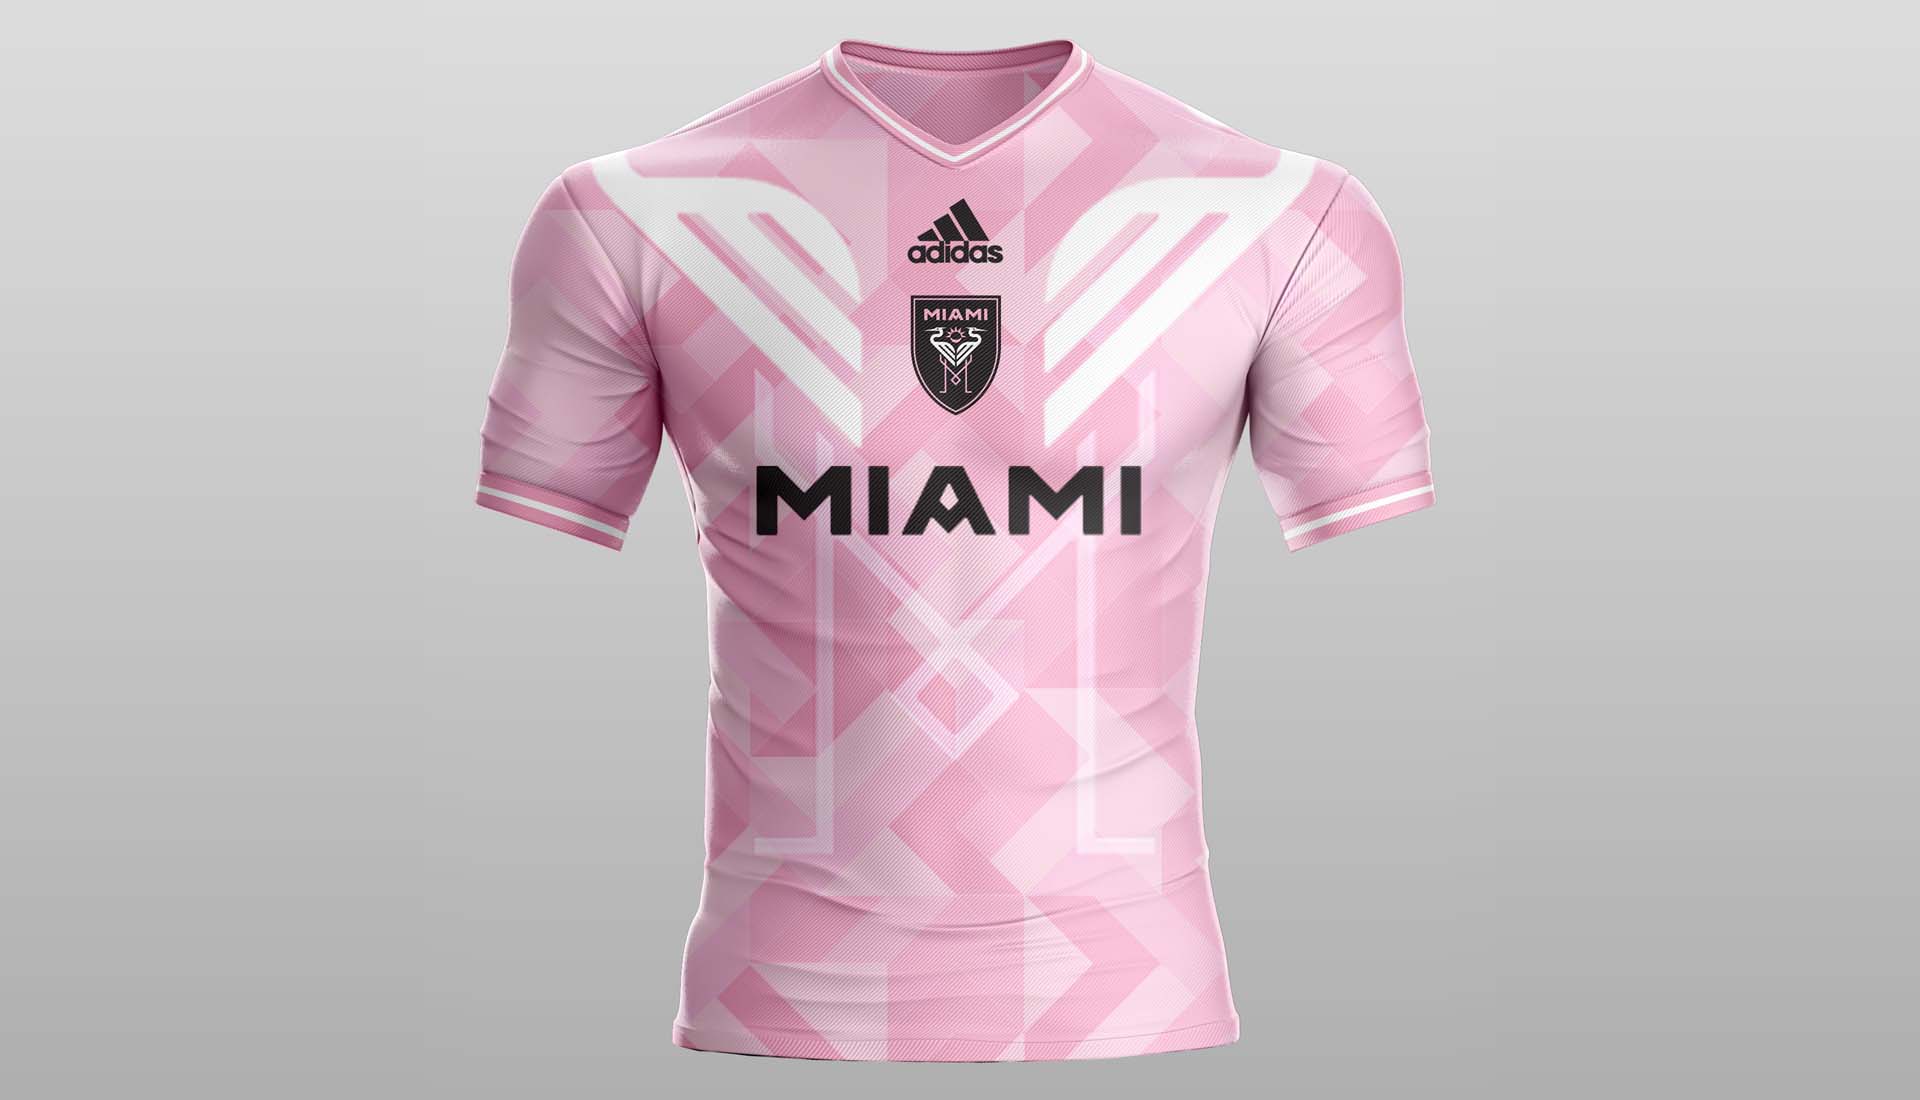 inter miami official jersey